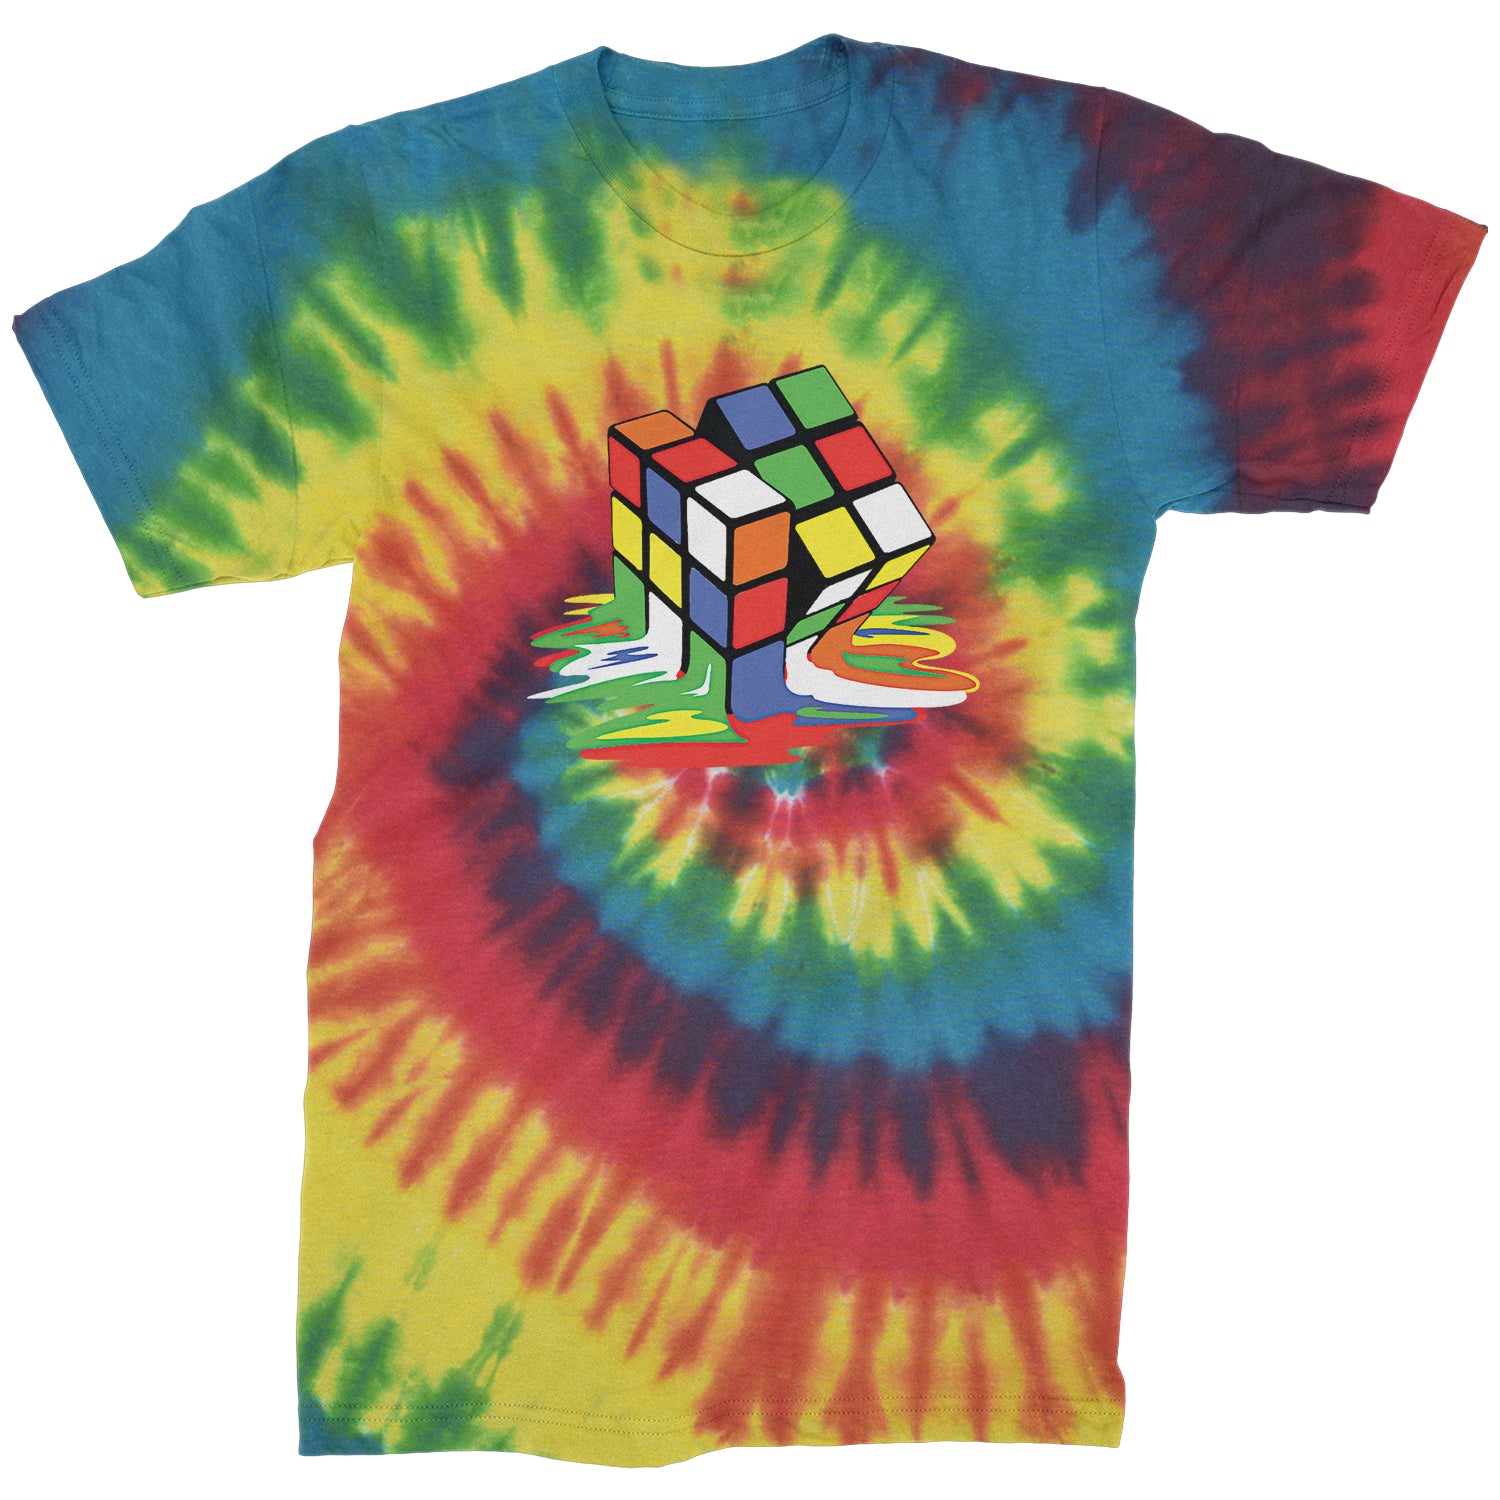 Melting Multi-Colored Cube Mens T-shirt gamer, gaming, nerd, shirt by Expression Tees